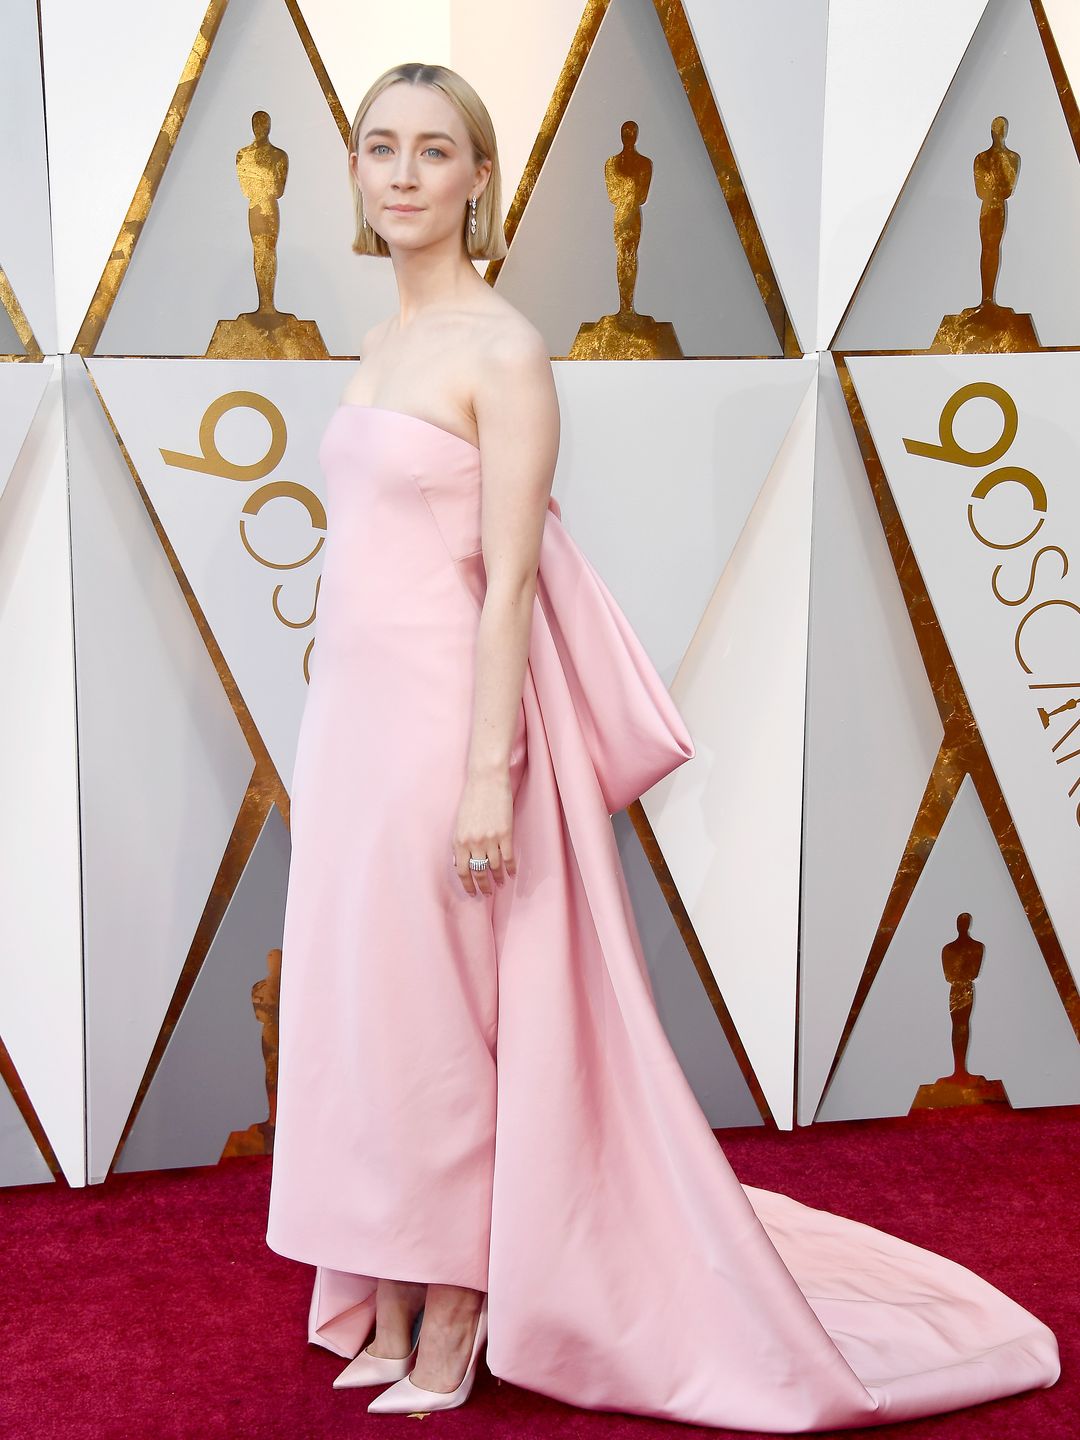 Saoirse Ronan attends the 90th Annual Academy Awards in a baby pink gown with a giant bow back